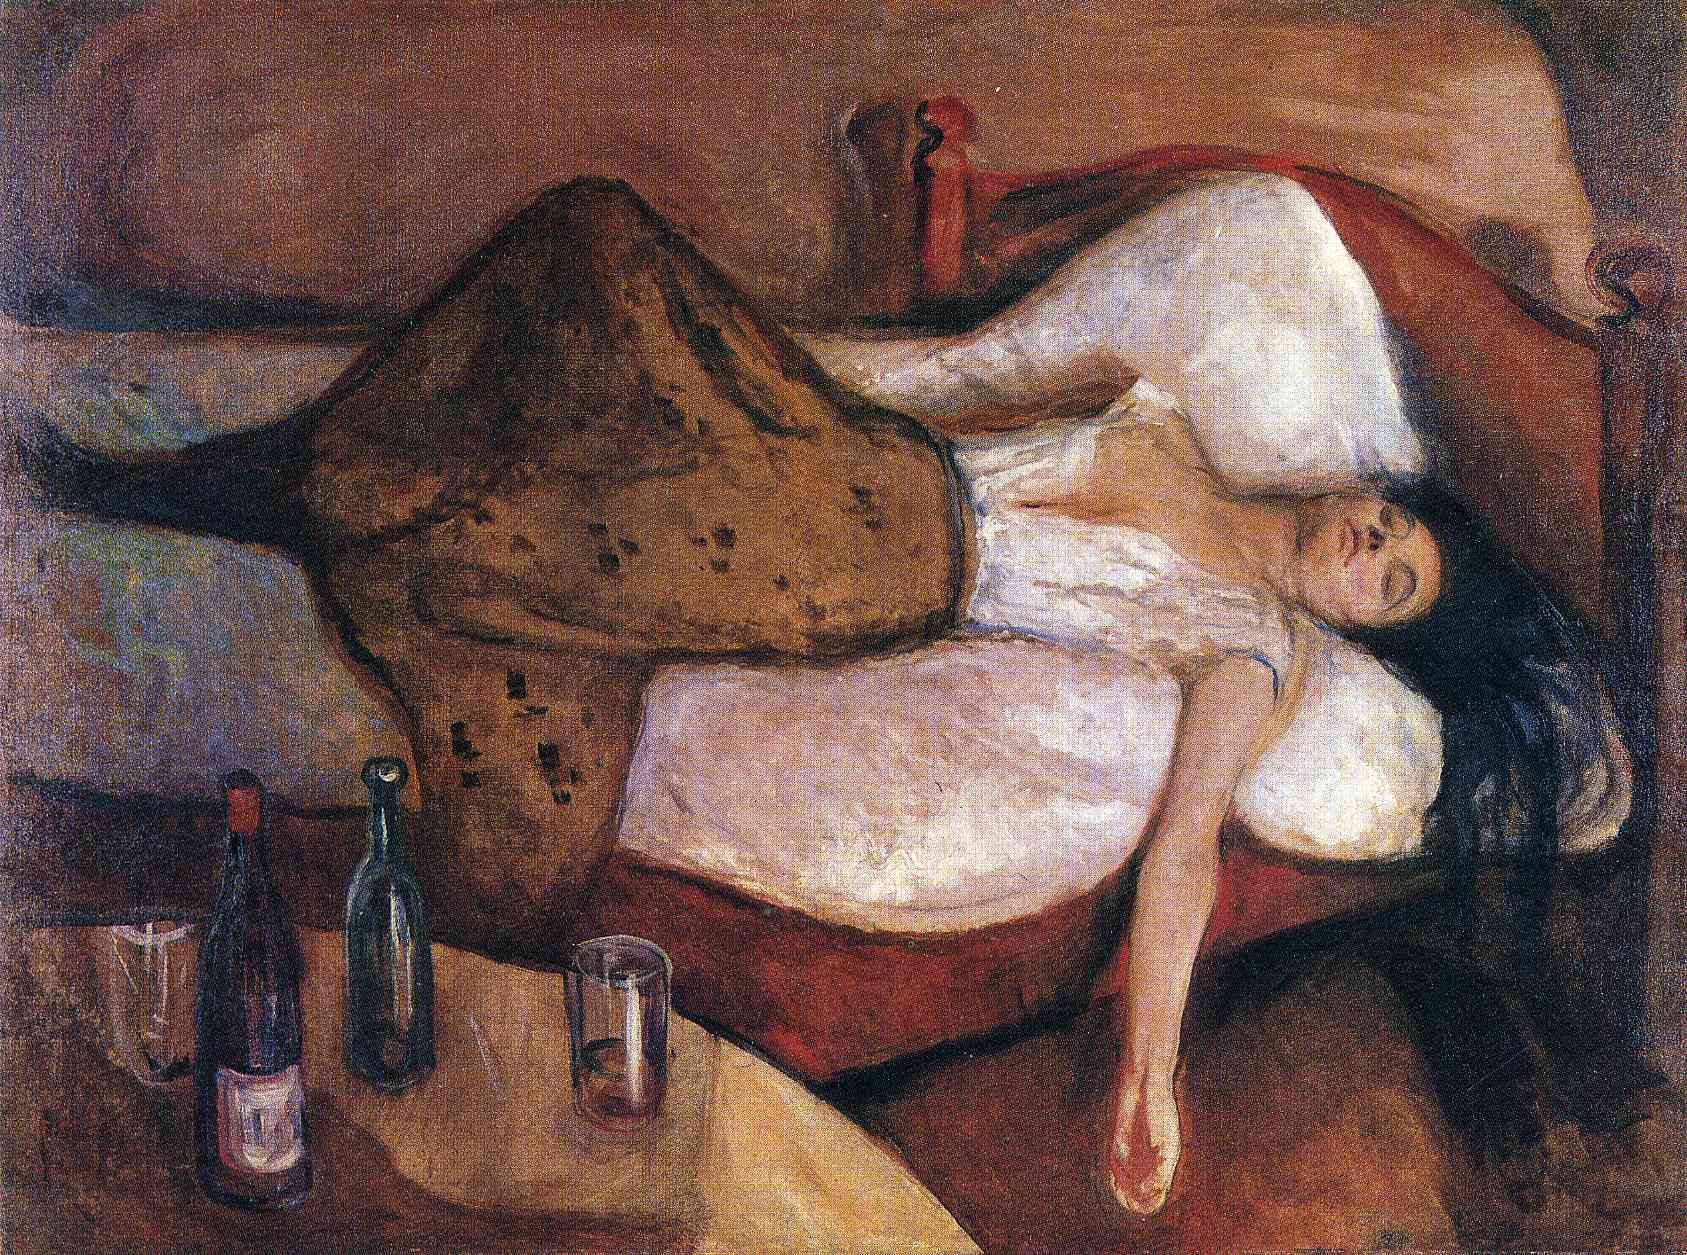 The Day After by Edvard Munch - 1894/95 - 115 x 152 cm Nasjonalmuseet